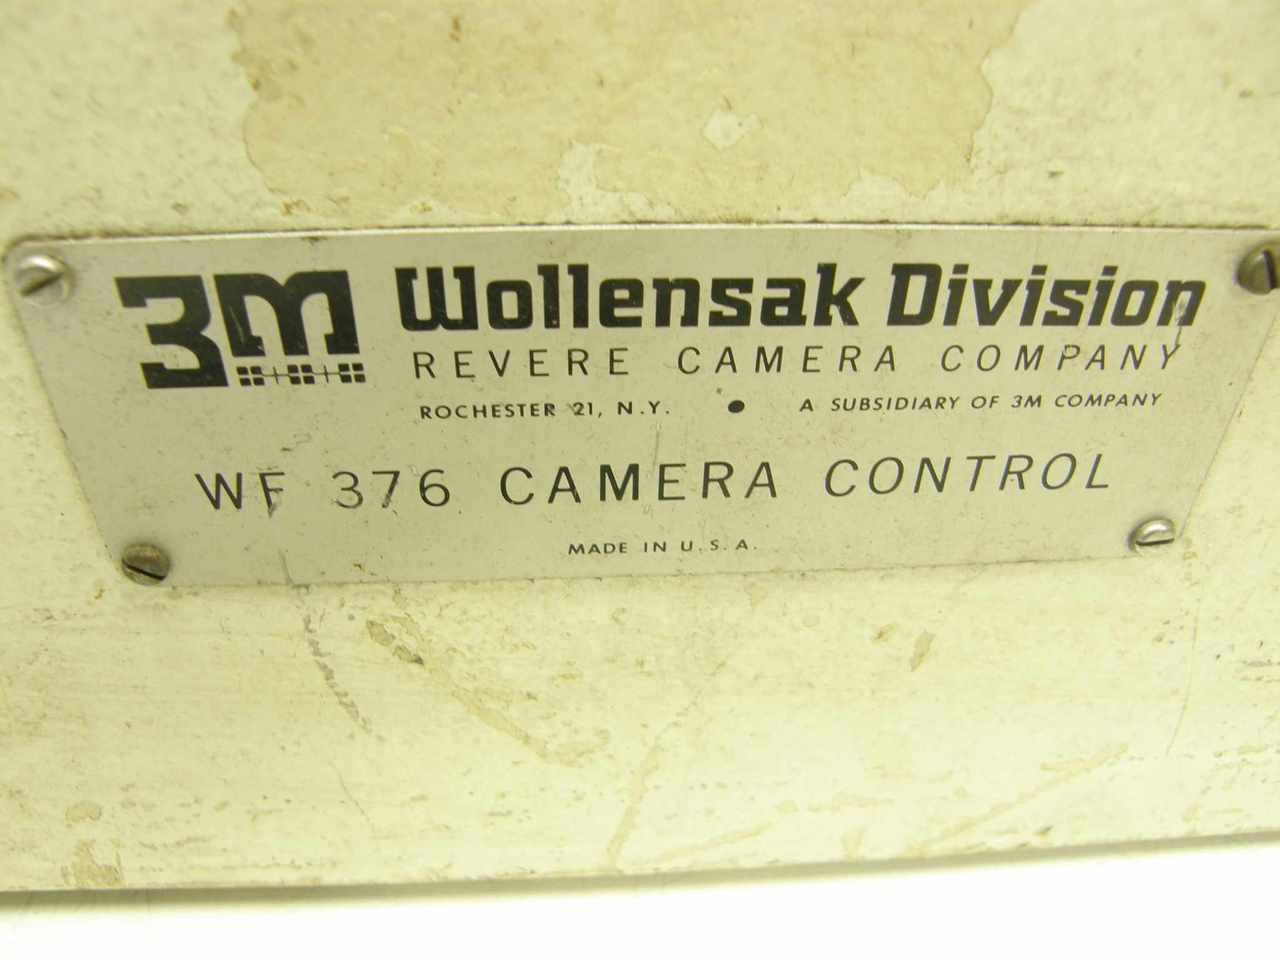 The Wollensak brand was used by the 3M corporation for a series of